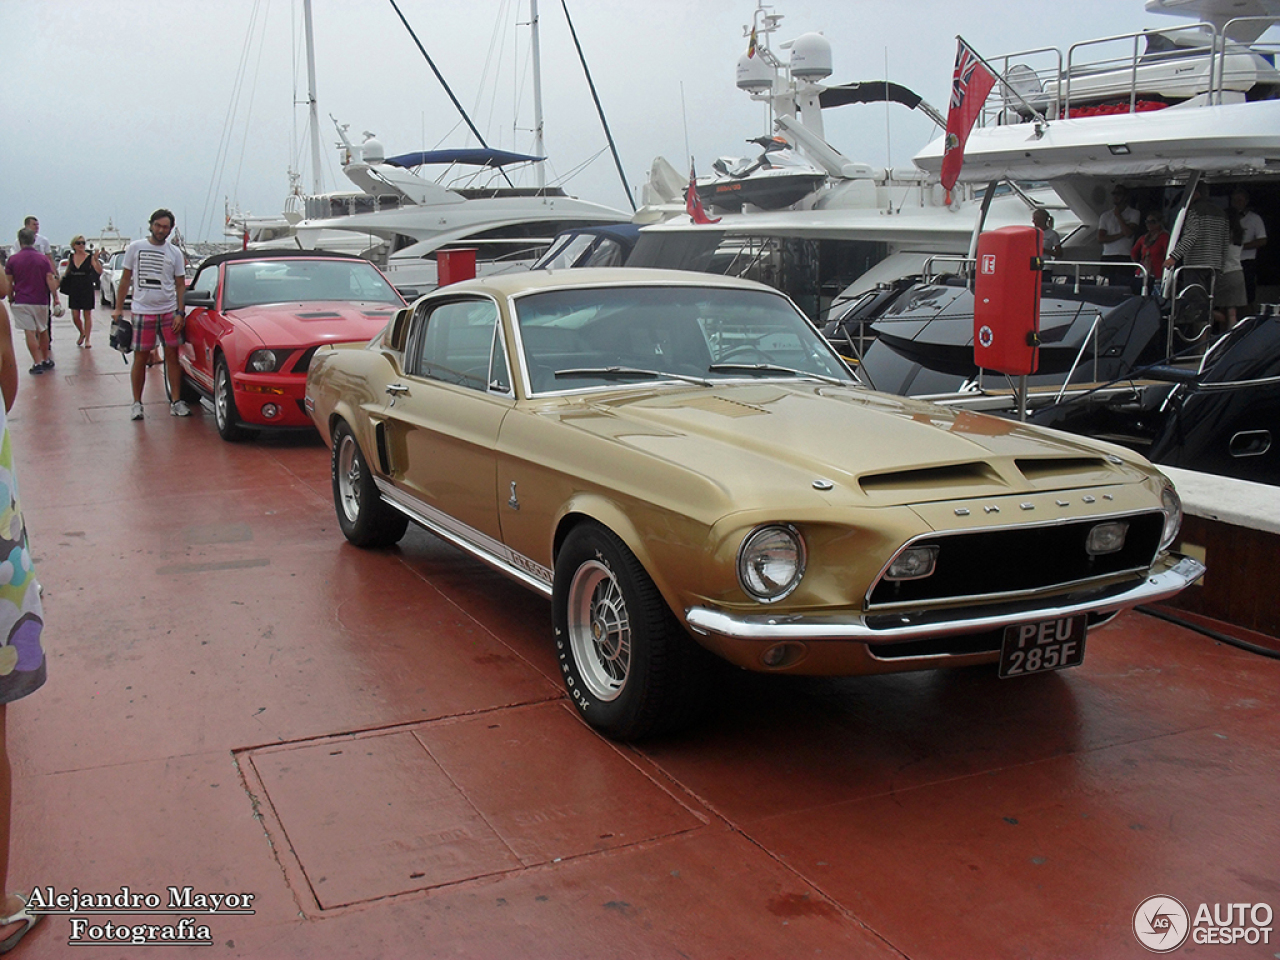 Ford Mustang Shelby G.T. 500